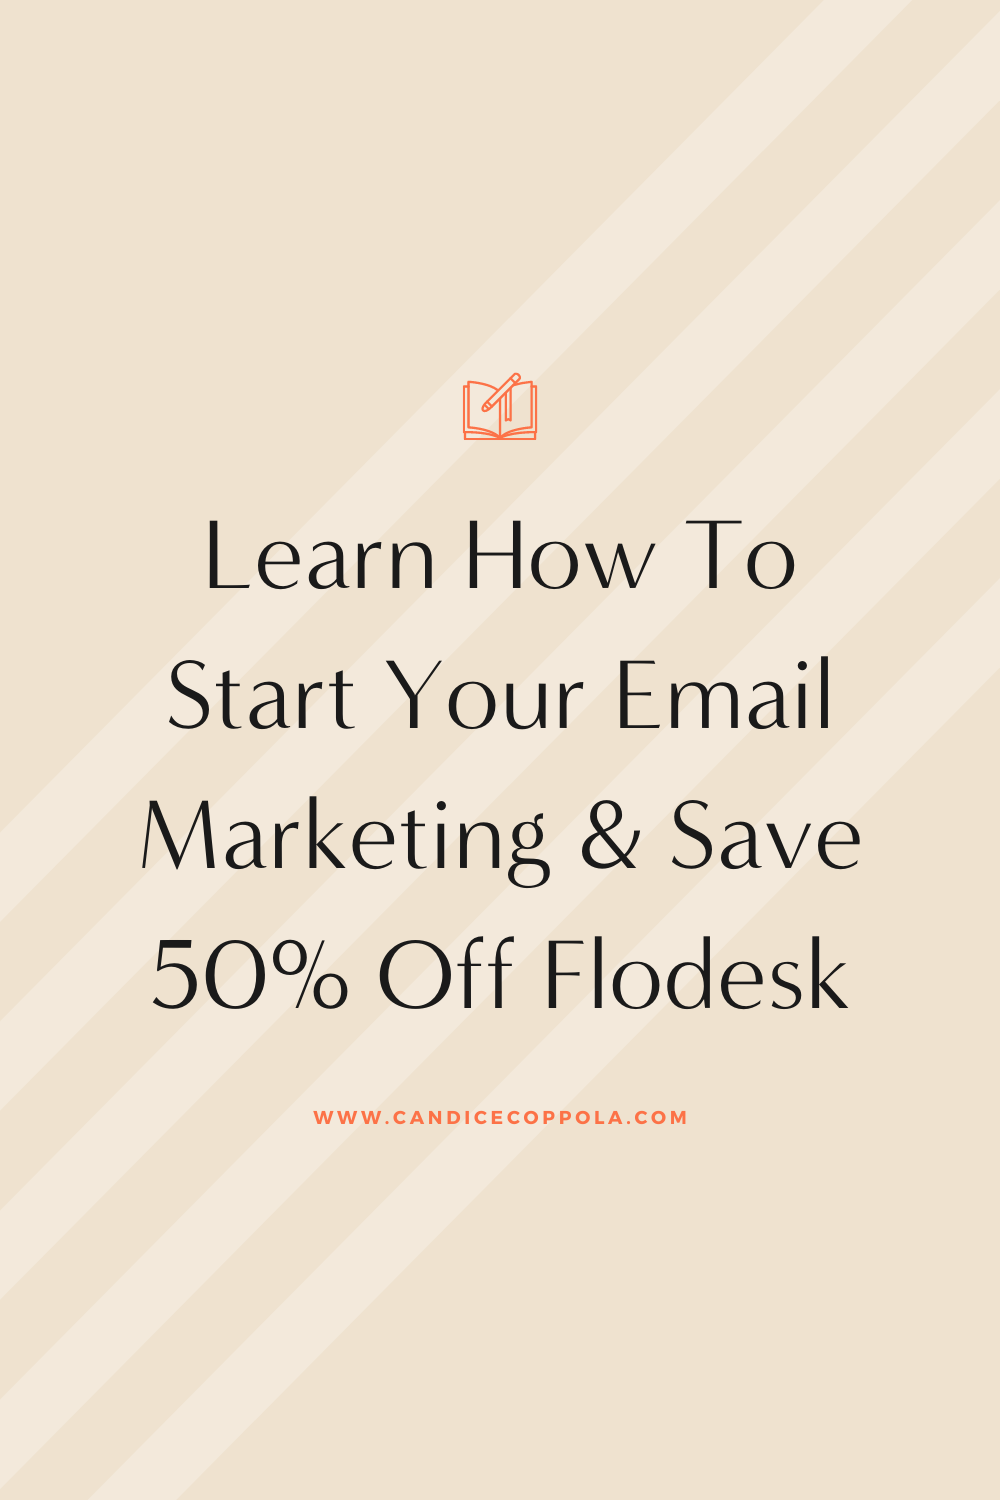 Use the Flodesk Promo Code CANDICE50 and receive 50% off the email marketing software for your first year. For only $19 a month, you can scale your business with a powerful (and pretty) email marketing tool that'll be sure to have your customers buying your products and services.